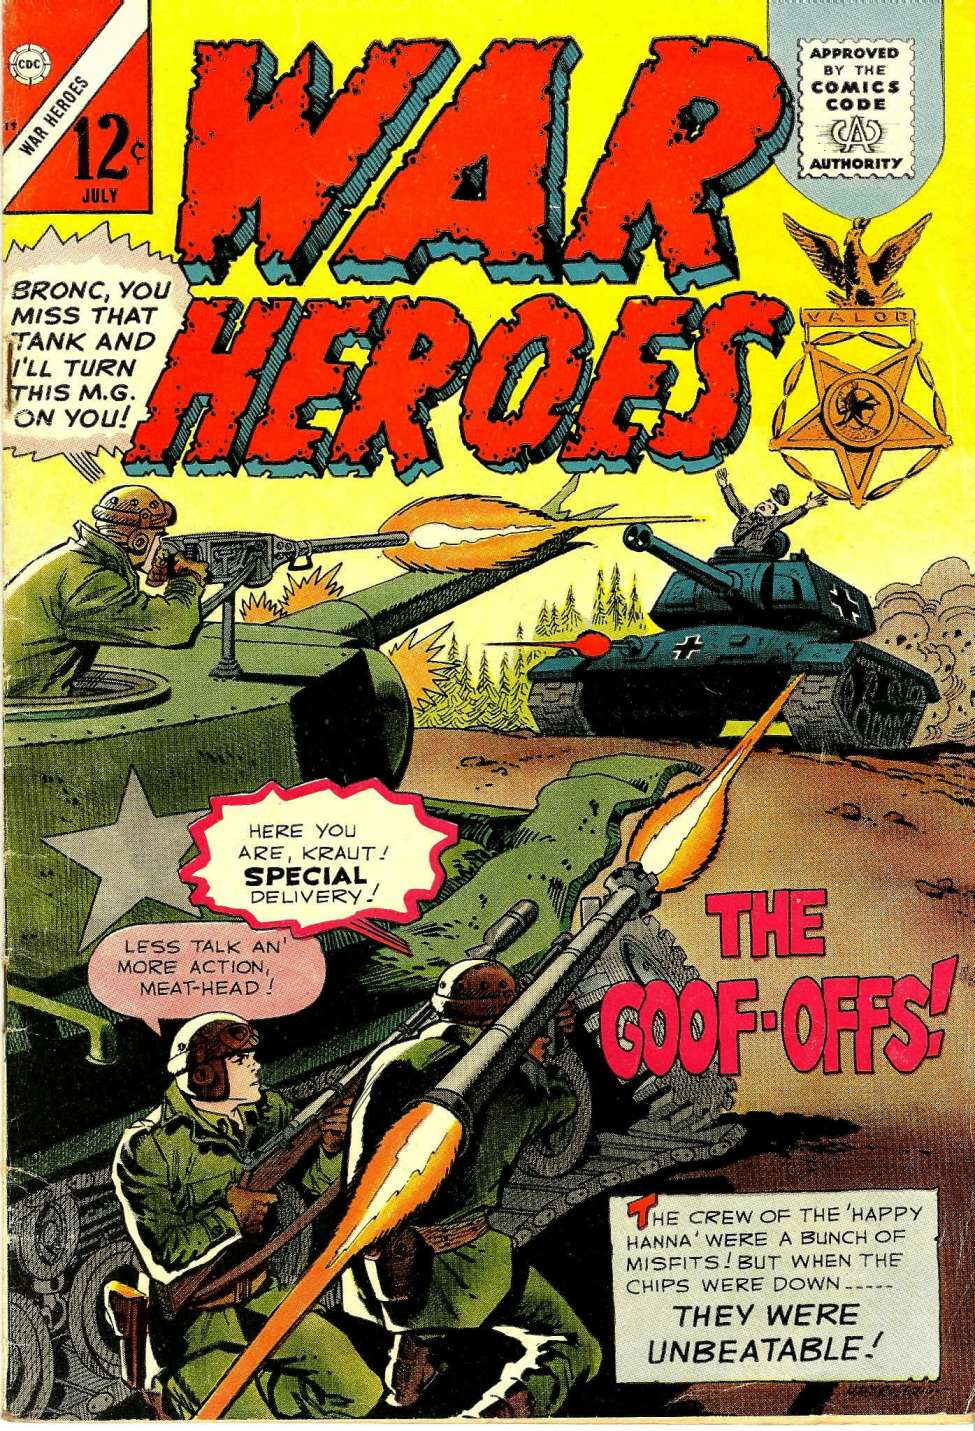 Book Cover For War Heroes 19